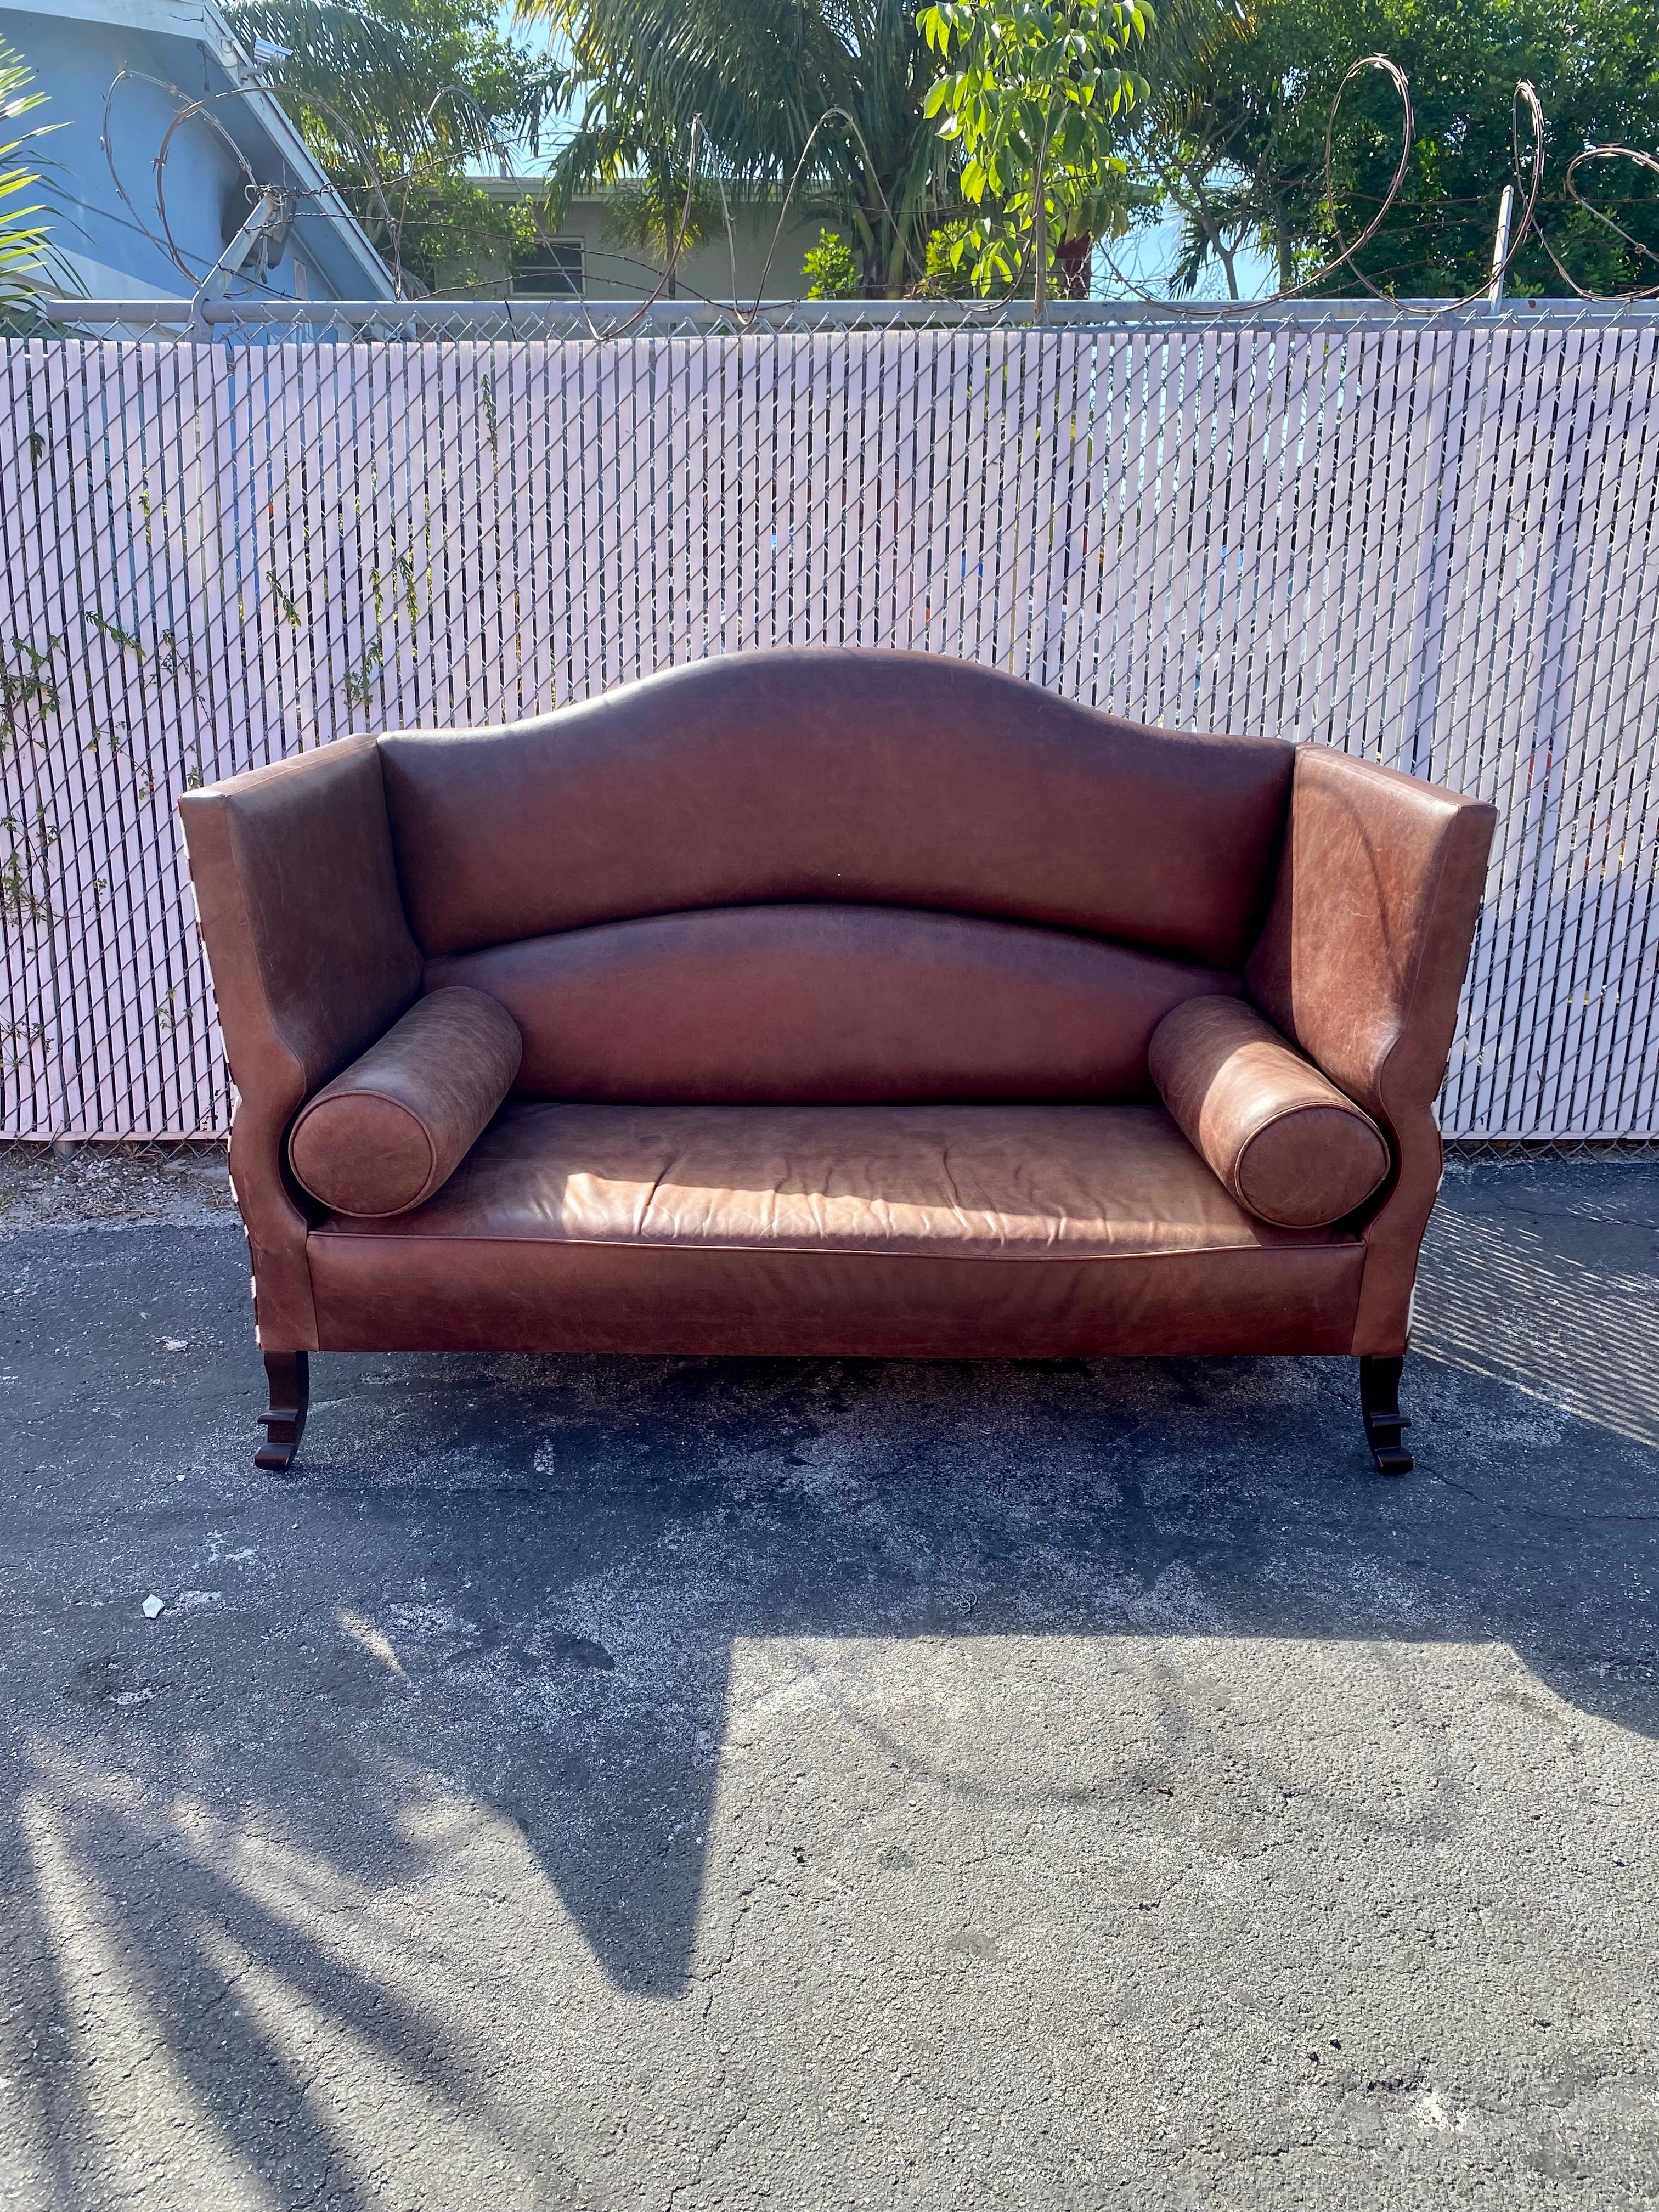 On offer on this occasion is one of the most stunning, sofa sette you could hope to find. Outstanding design is exhibited throughout. Made of Zebra hide, saddle leather and wood. The beautiful sofa is a statement and packed with personality!! Just